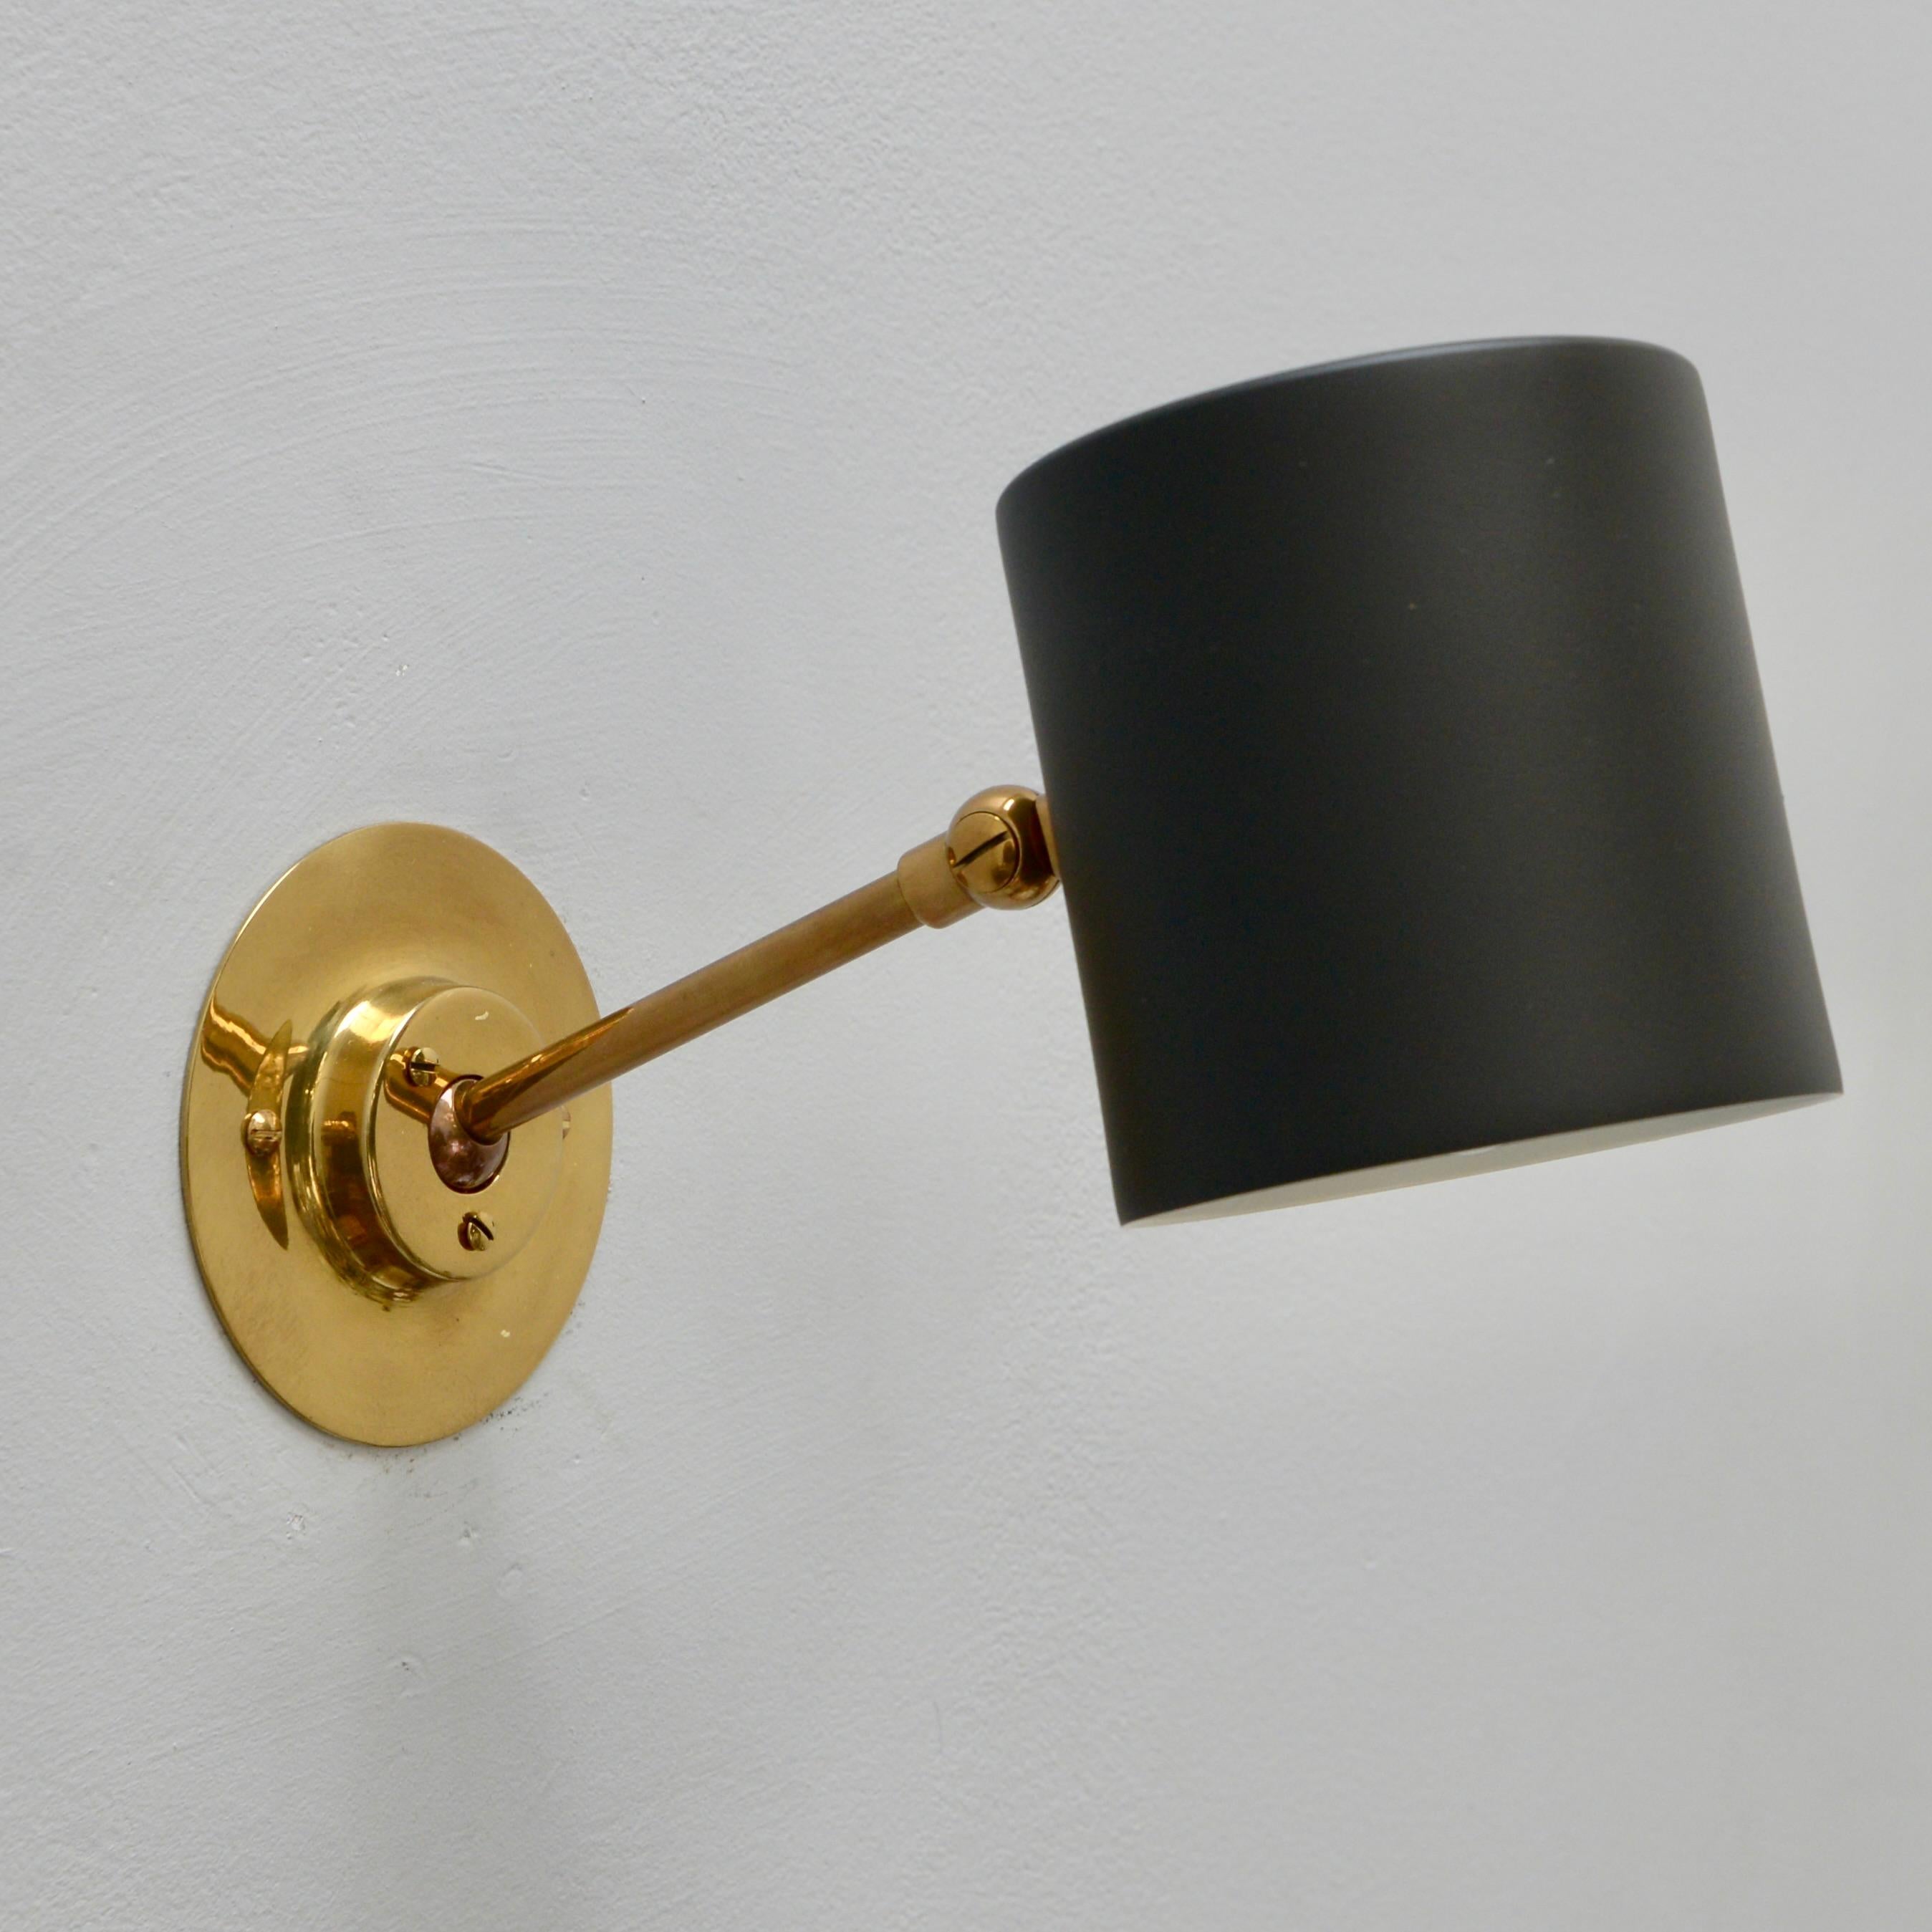 The LUSB Cylinder Sconce by Lumfardo Luminaires is a French inspired wall sconce in brass and painted aluminum. The brass in finished in a lightly aged lacquered brass finish. This sconce has a fully articulating ball and socket joint at the back